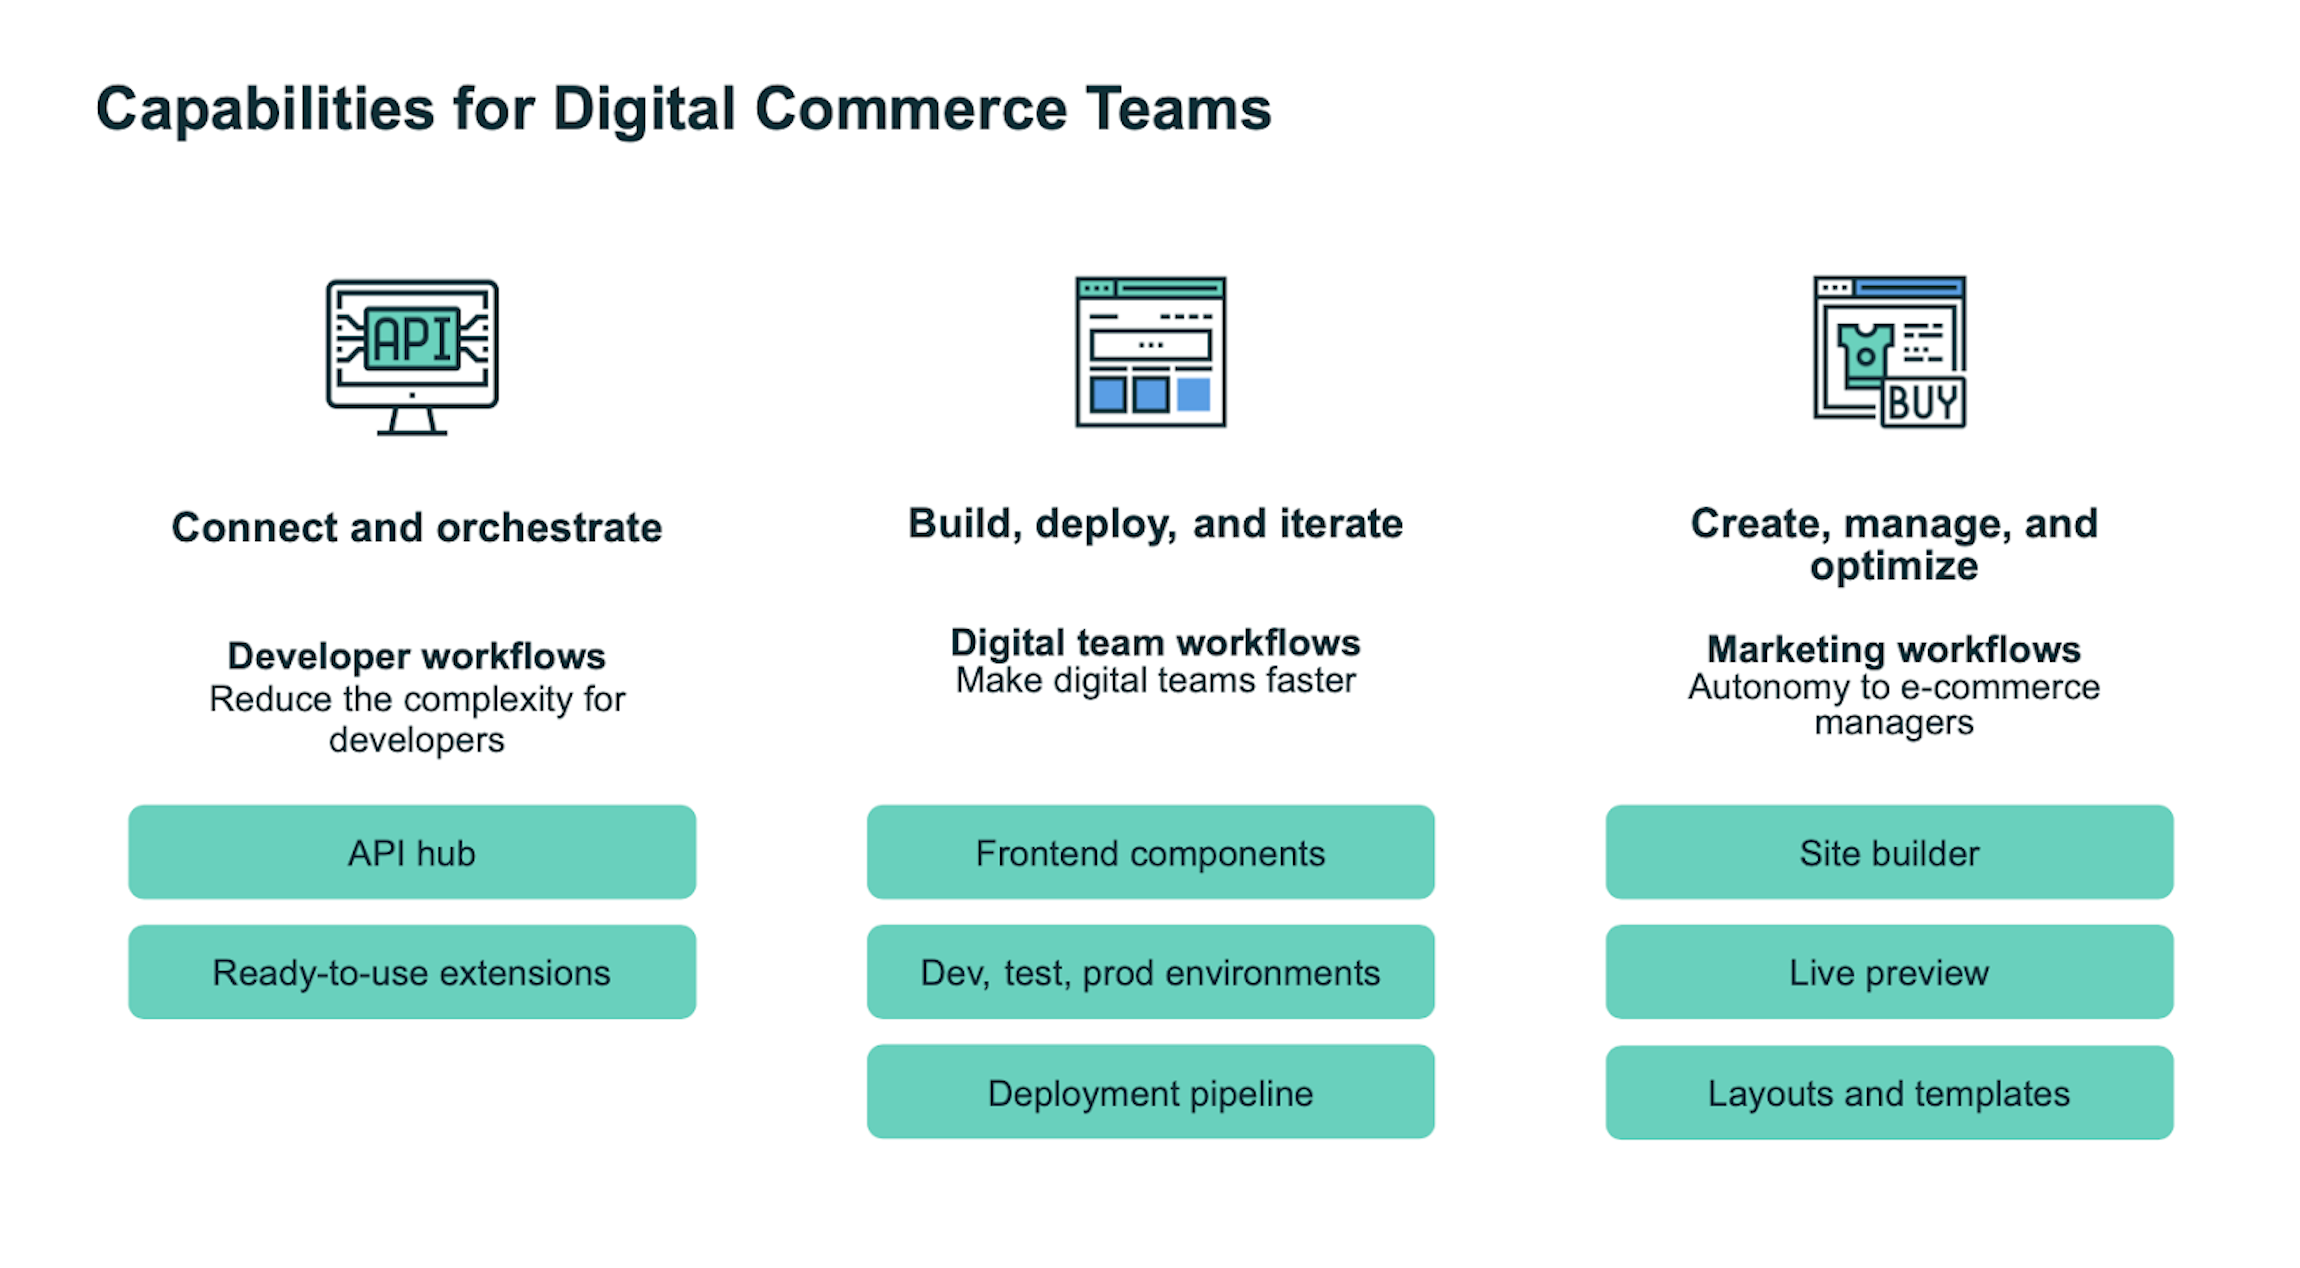 Capabilities for digital commerce teams provided by frontend-as-a-service